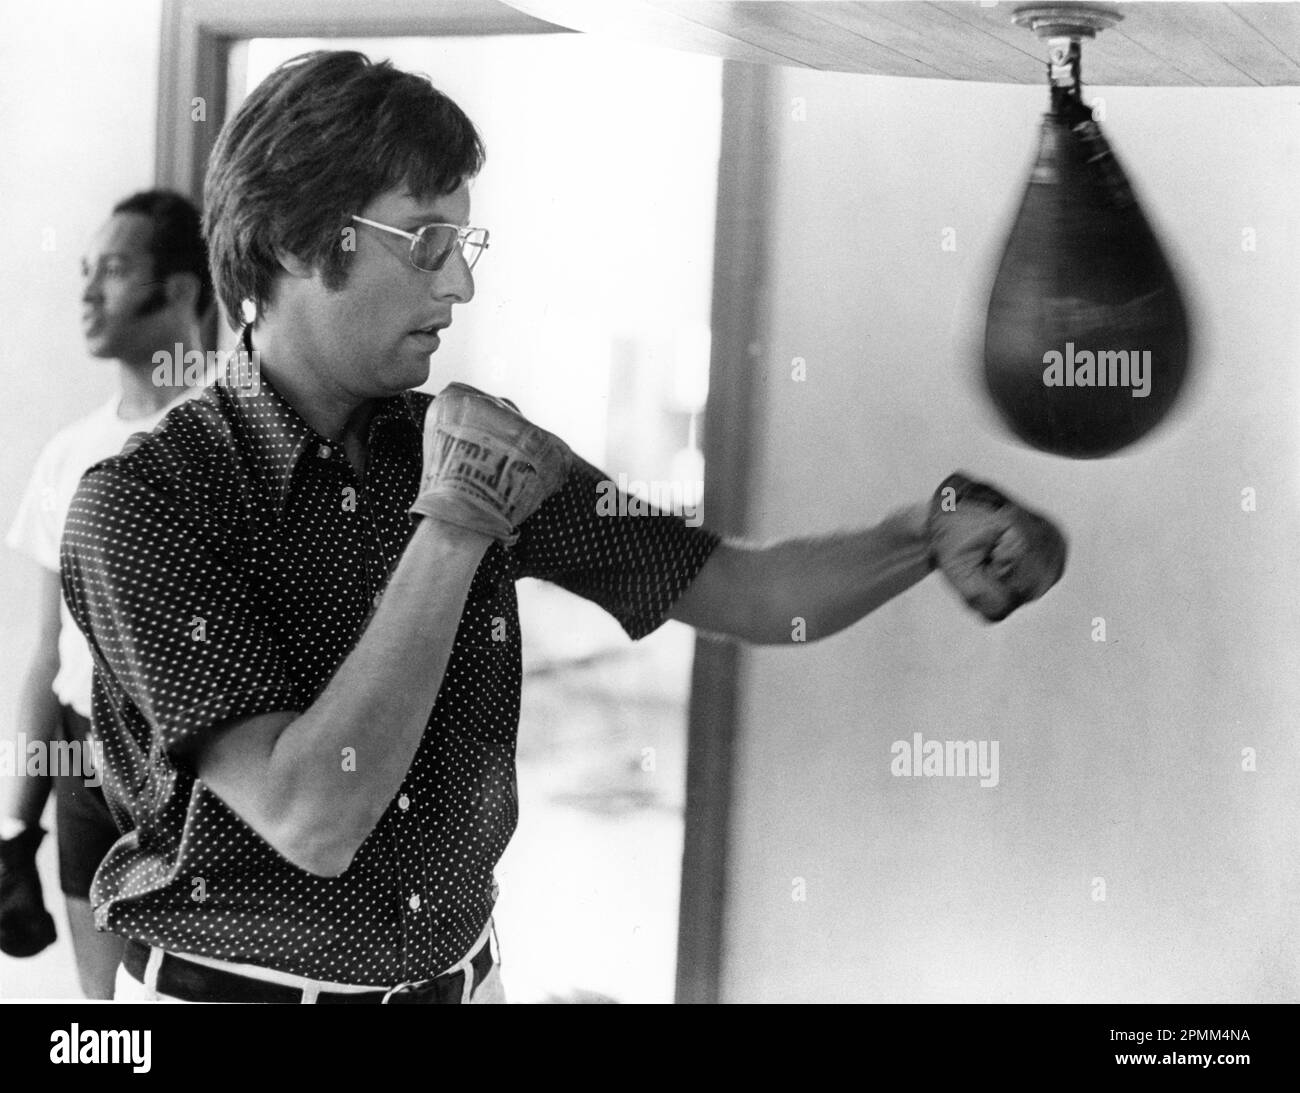 Director WILLIAM FRIEDKIN on set candid practices boxing during break in filming of THE EXORCIST 1973 director WILLIAM FRIEDKIN novel / screenplay / producer William Peter Blatty Hoya Productions / Warner Bros. Stock Photo